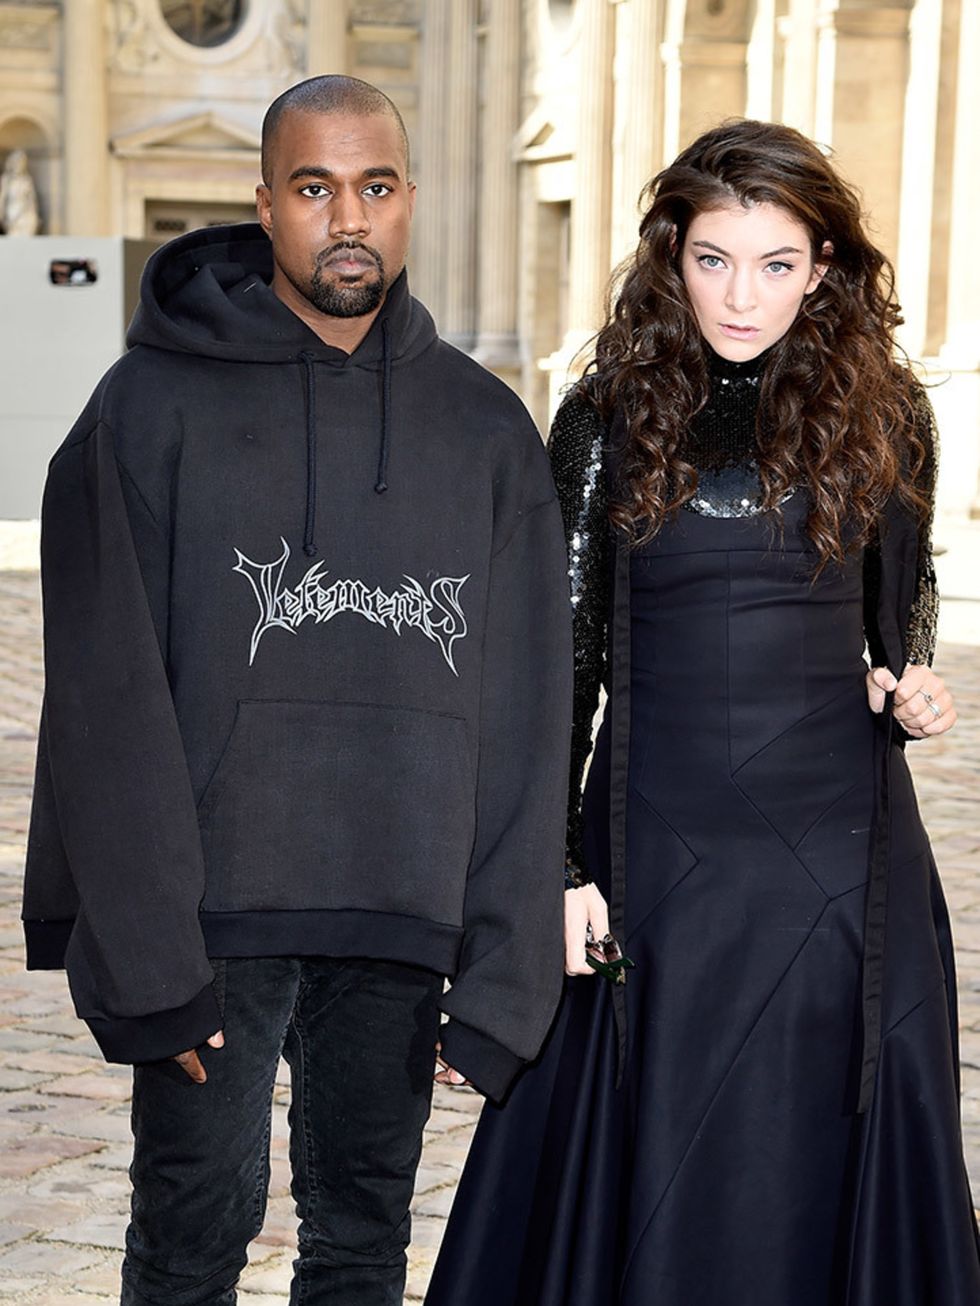 <p>With <a href="http://www.elleuk.com/tags/lorde">Lorde</a> at <a href="http://www.elleuk.com/fashion/news/christian-dior-autumn-winter-2015-paris-fashion-week-review">Christian Dior a/w 2015</a>: Carrying a Kanye, officially approved by the youth.</p>